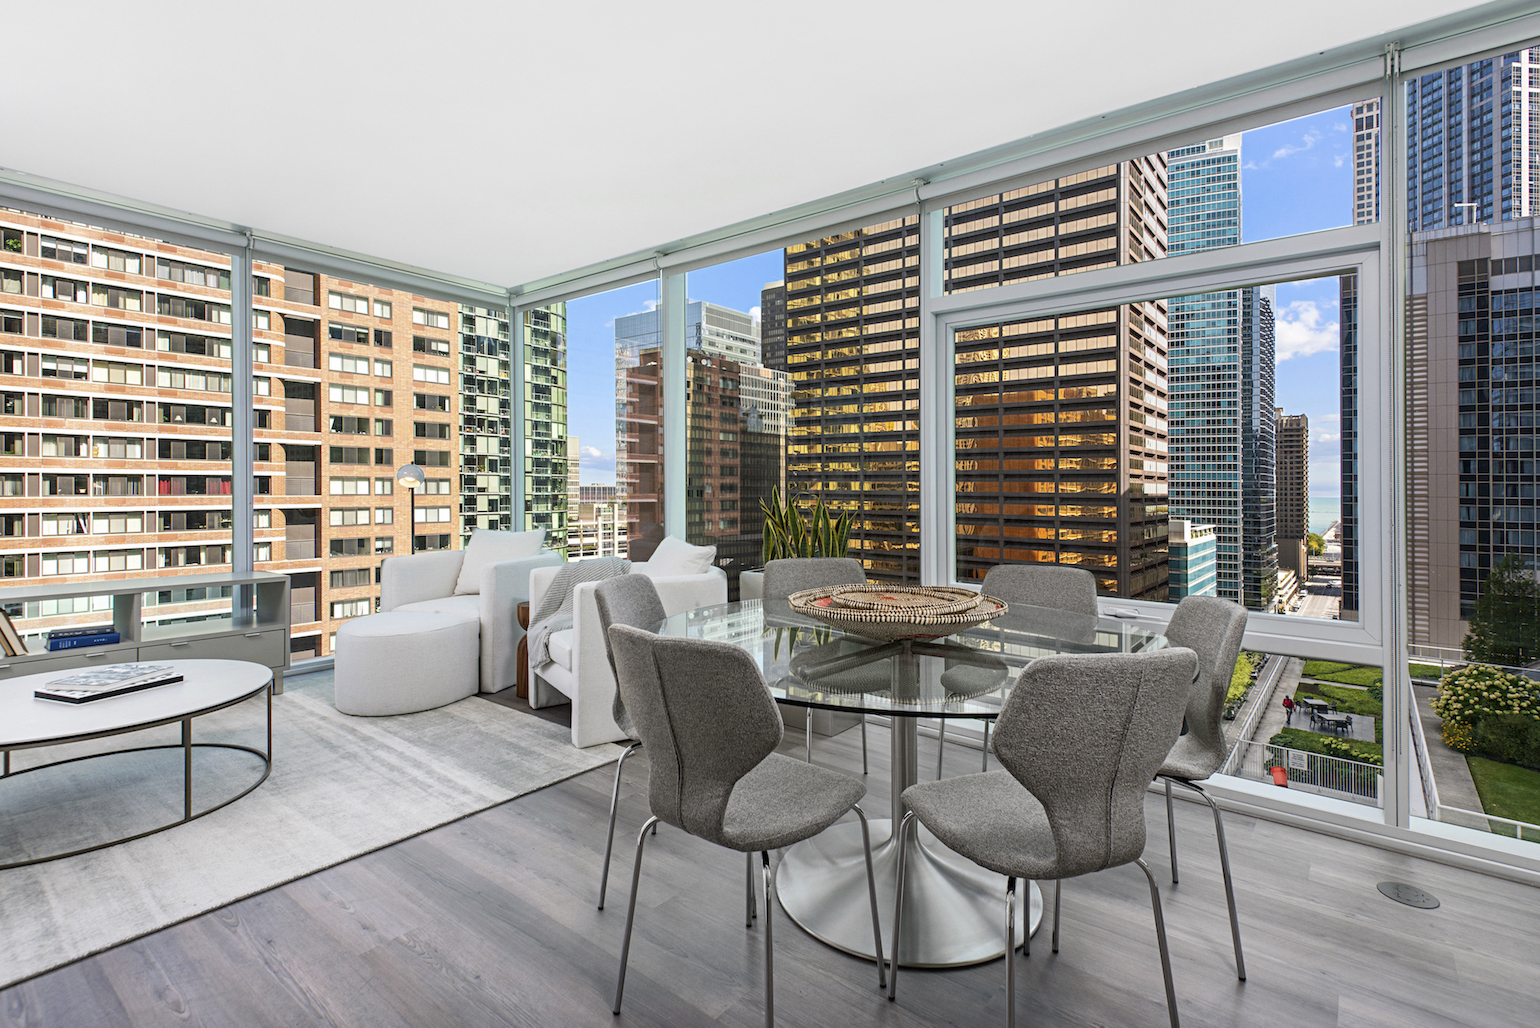 Chicago Real Estate: 5 Luxurious Downtown Condos That Are Springboards into City Life